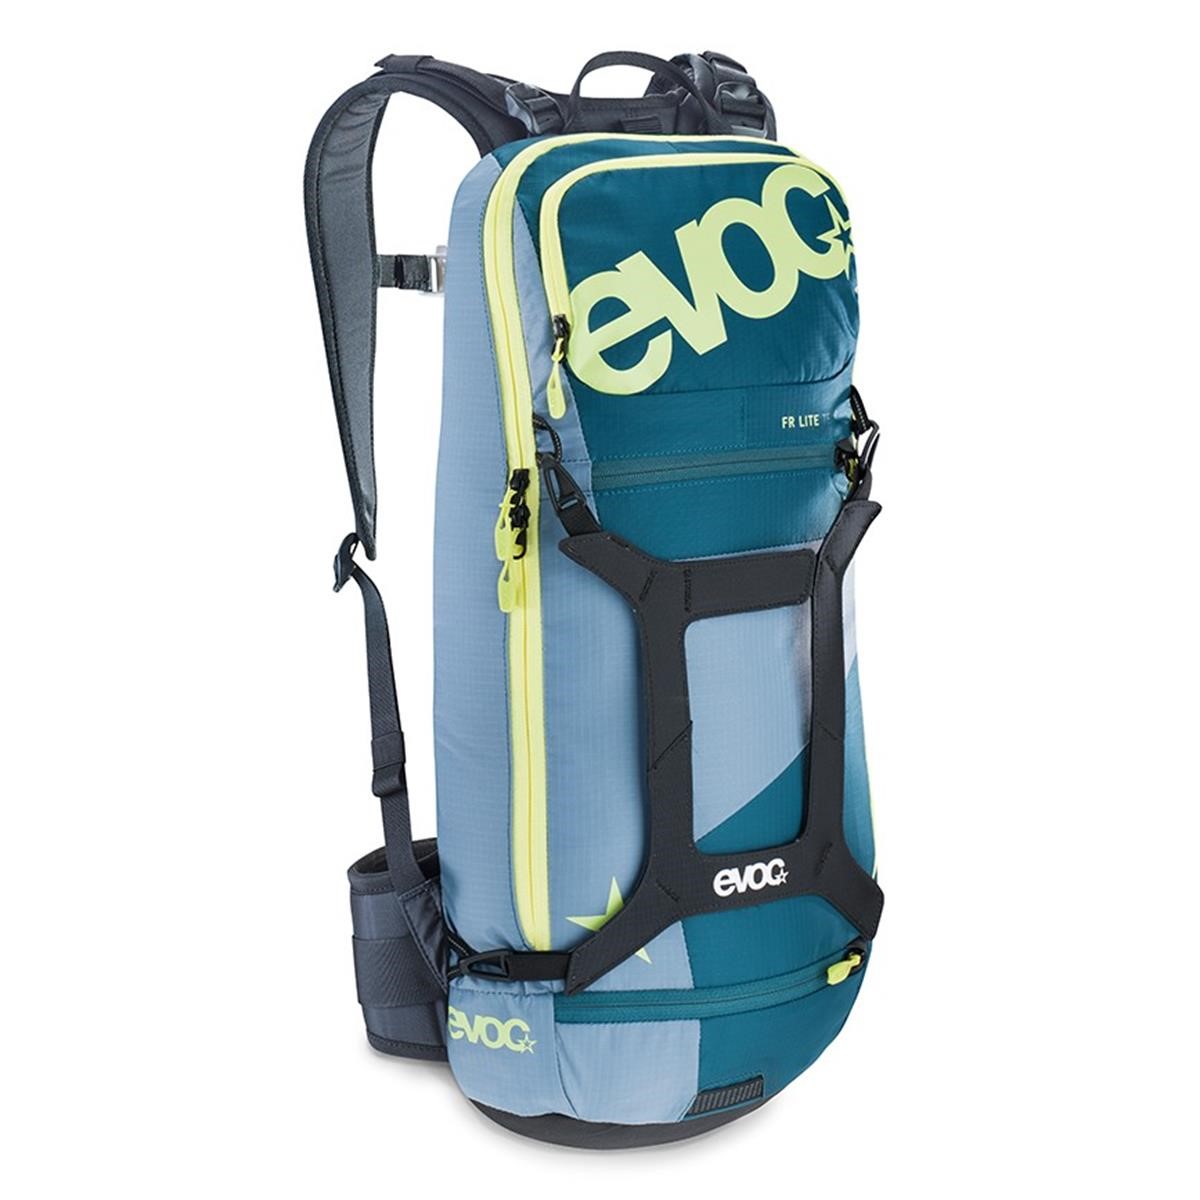 Evoc Protector Backpack with Hydration System Compartment FR Lite Team Petrol/Stone, 10 Liter